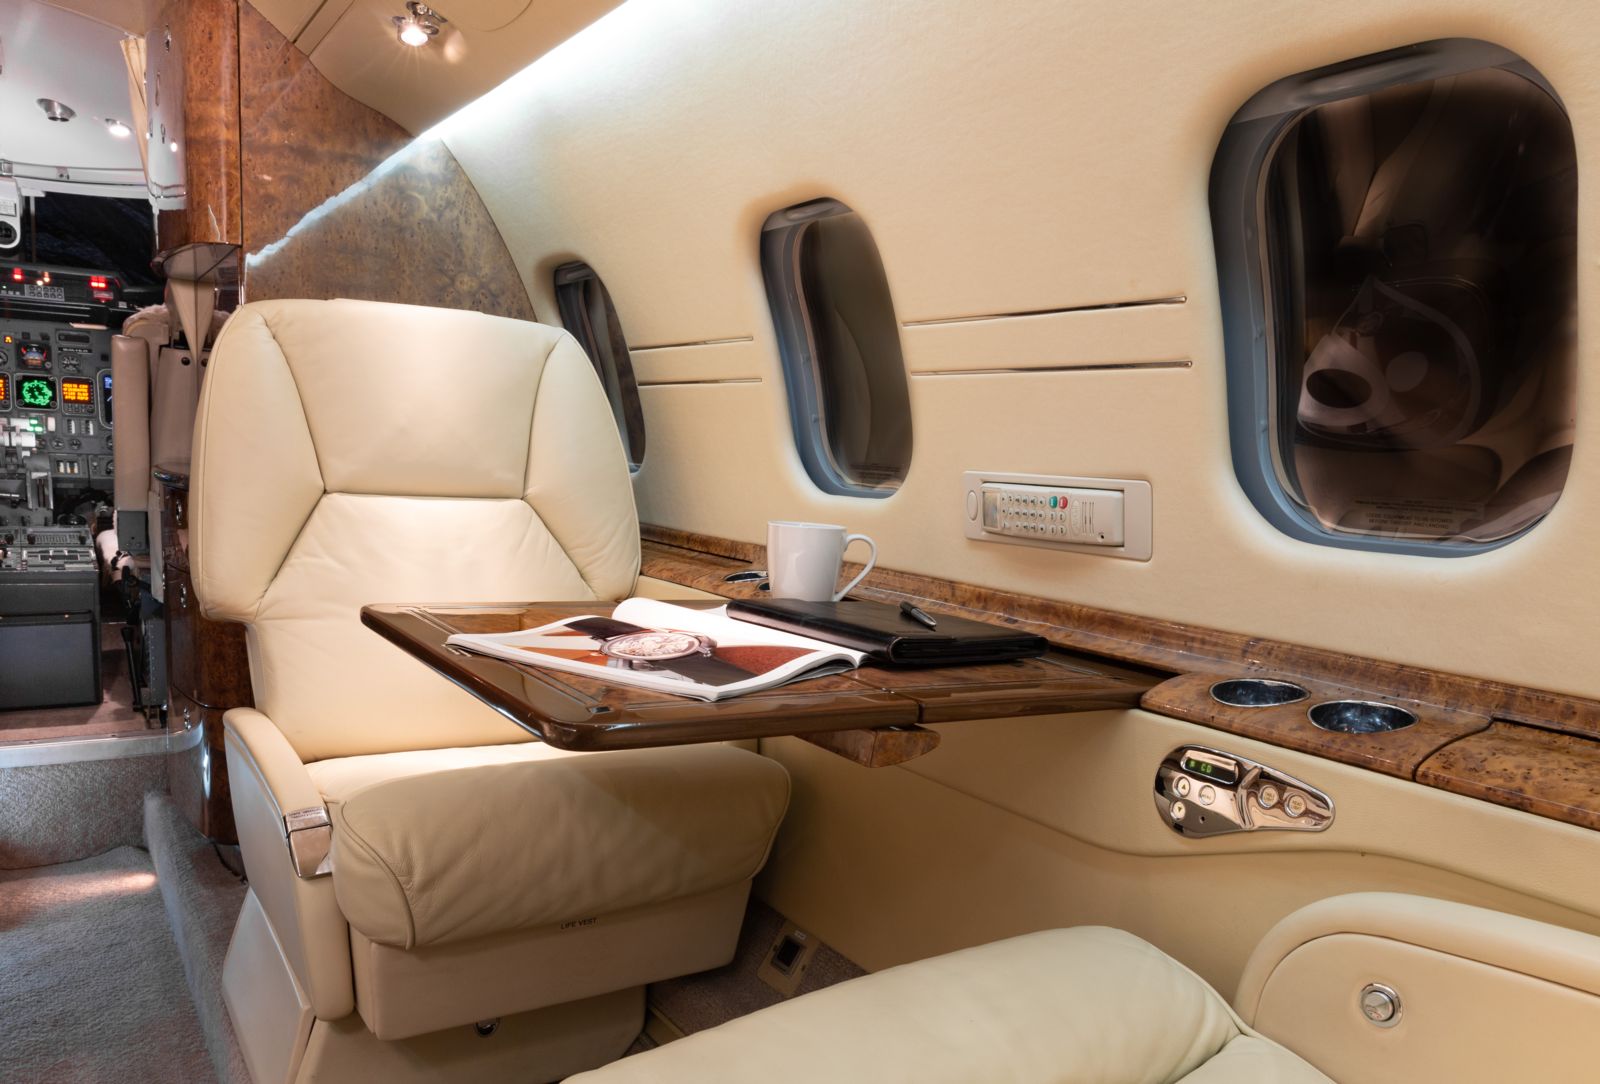 Bombardier Learjet 60  S/N 60-197 for sale | gallery image: /userfiles/images/Lear60_sn197/vip%20seat.jpg